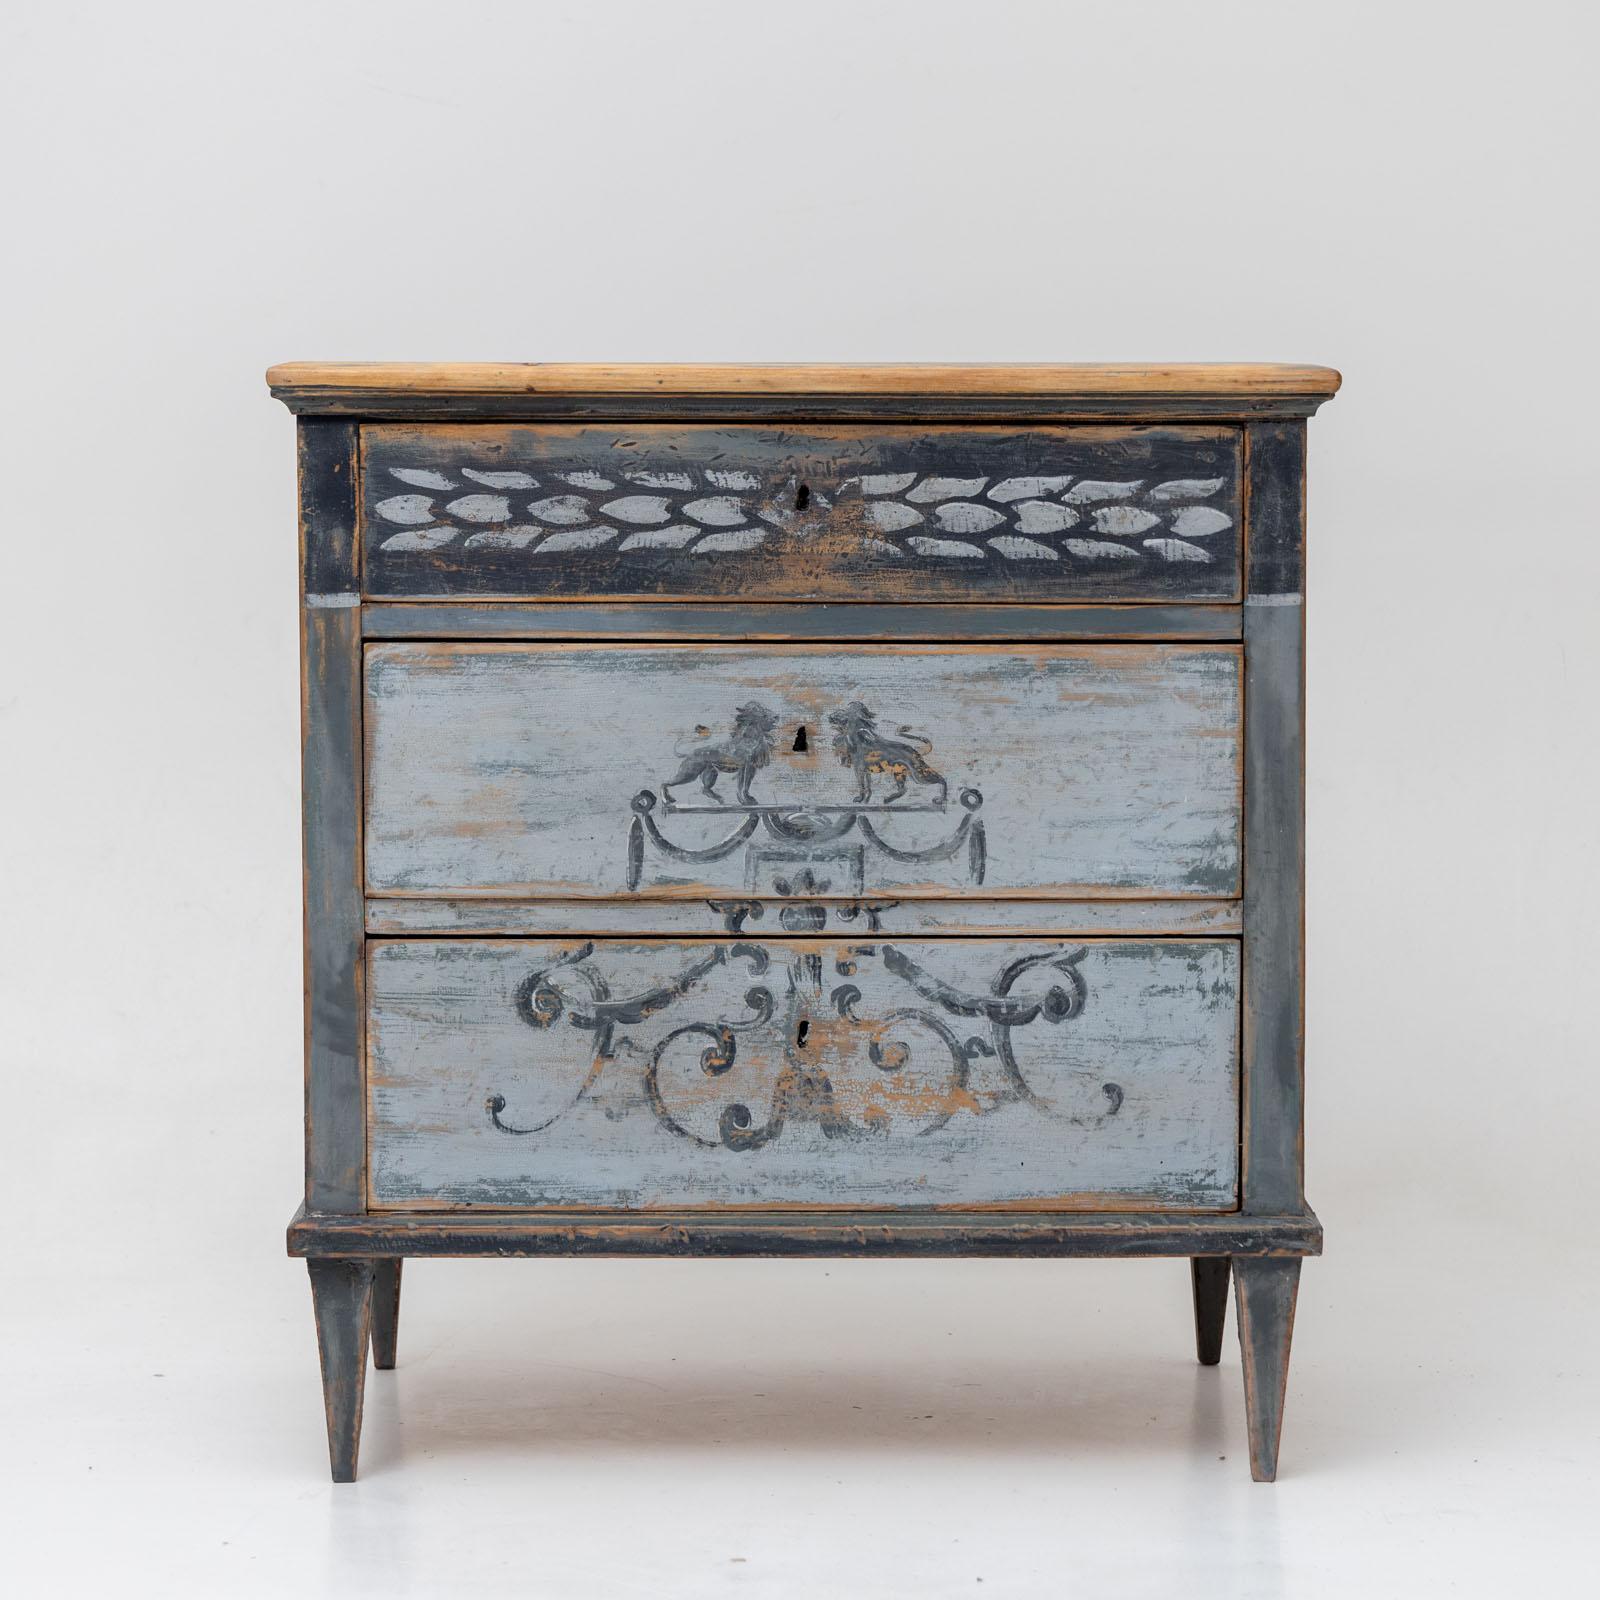 A small Biedermeier chest of drawers with three drawers and new painting. The blue setting is made according to historical models and has an antique patina.